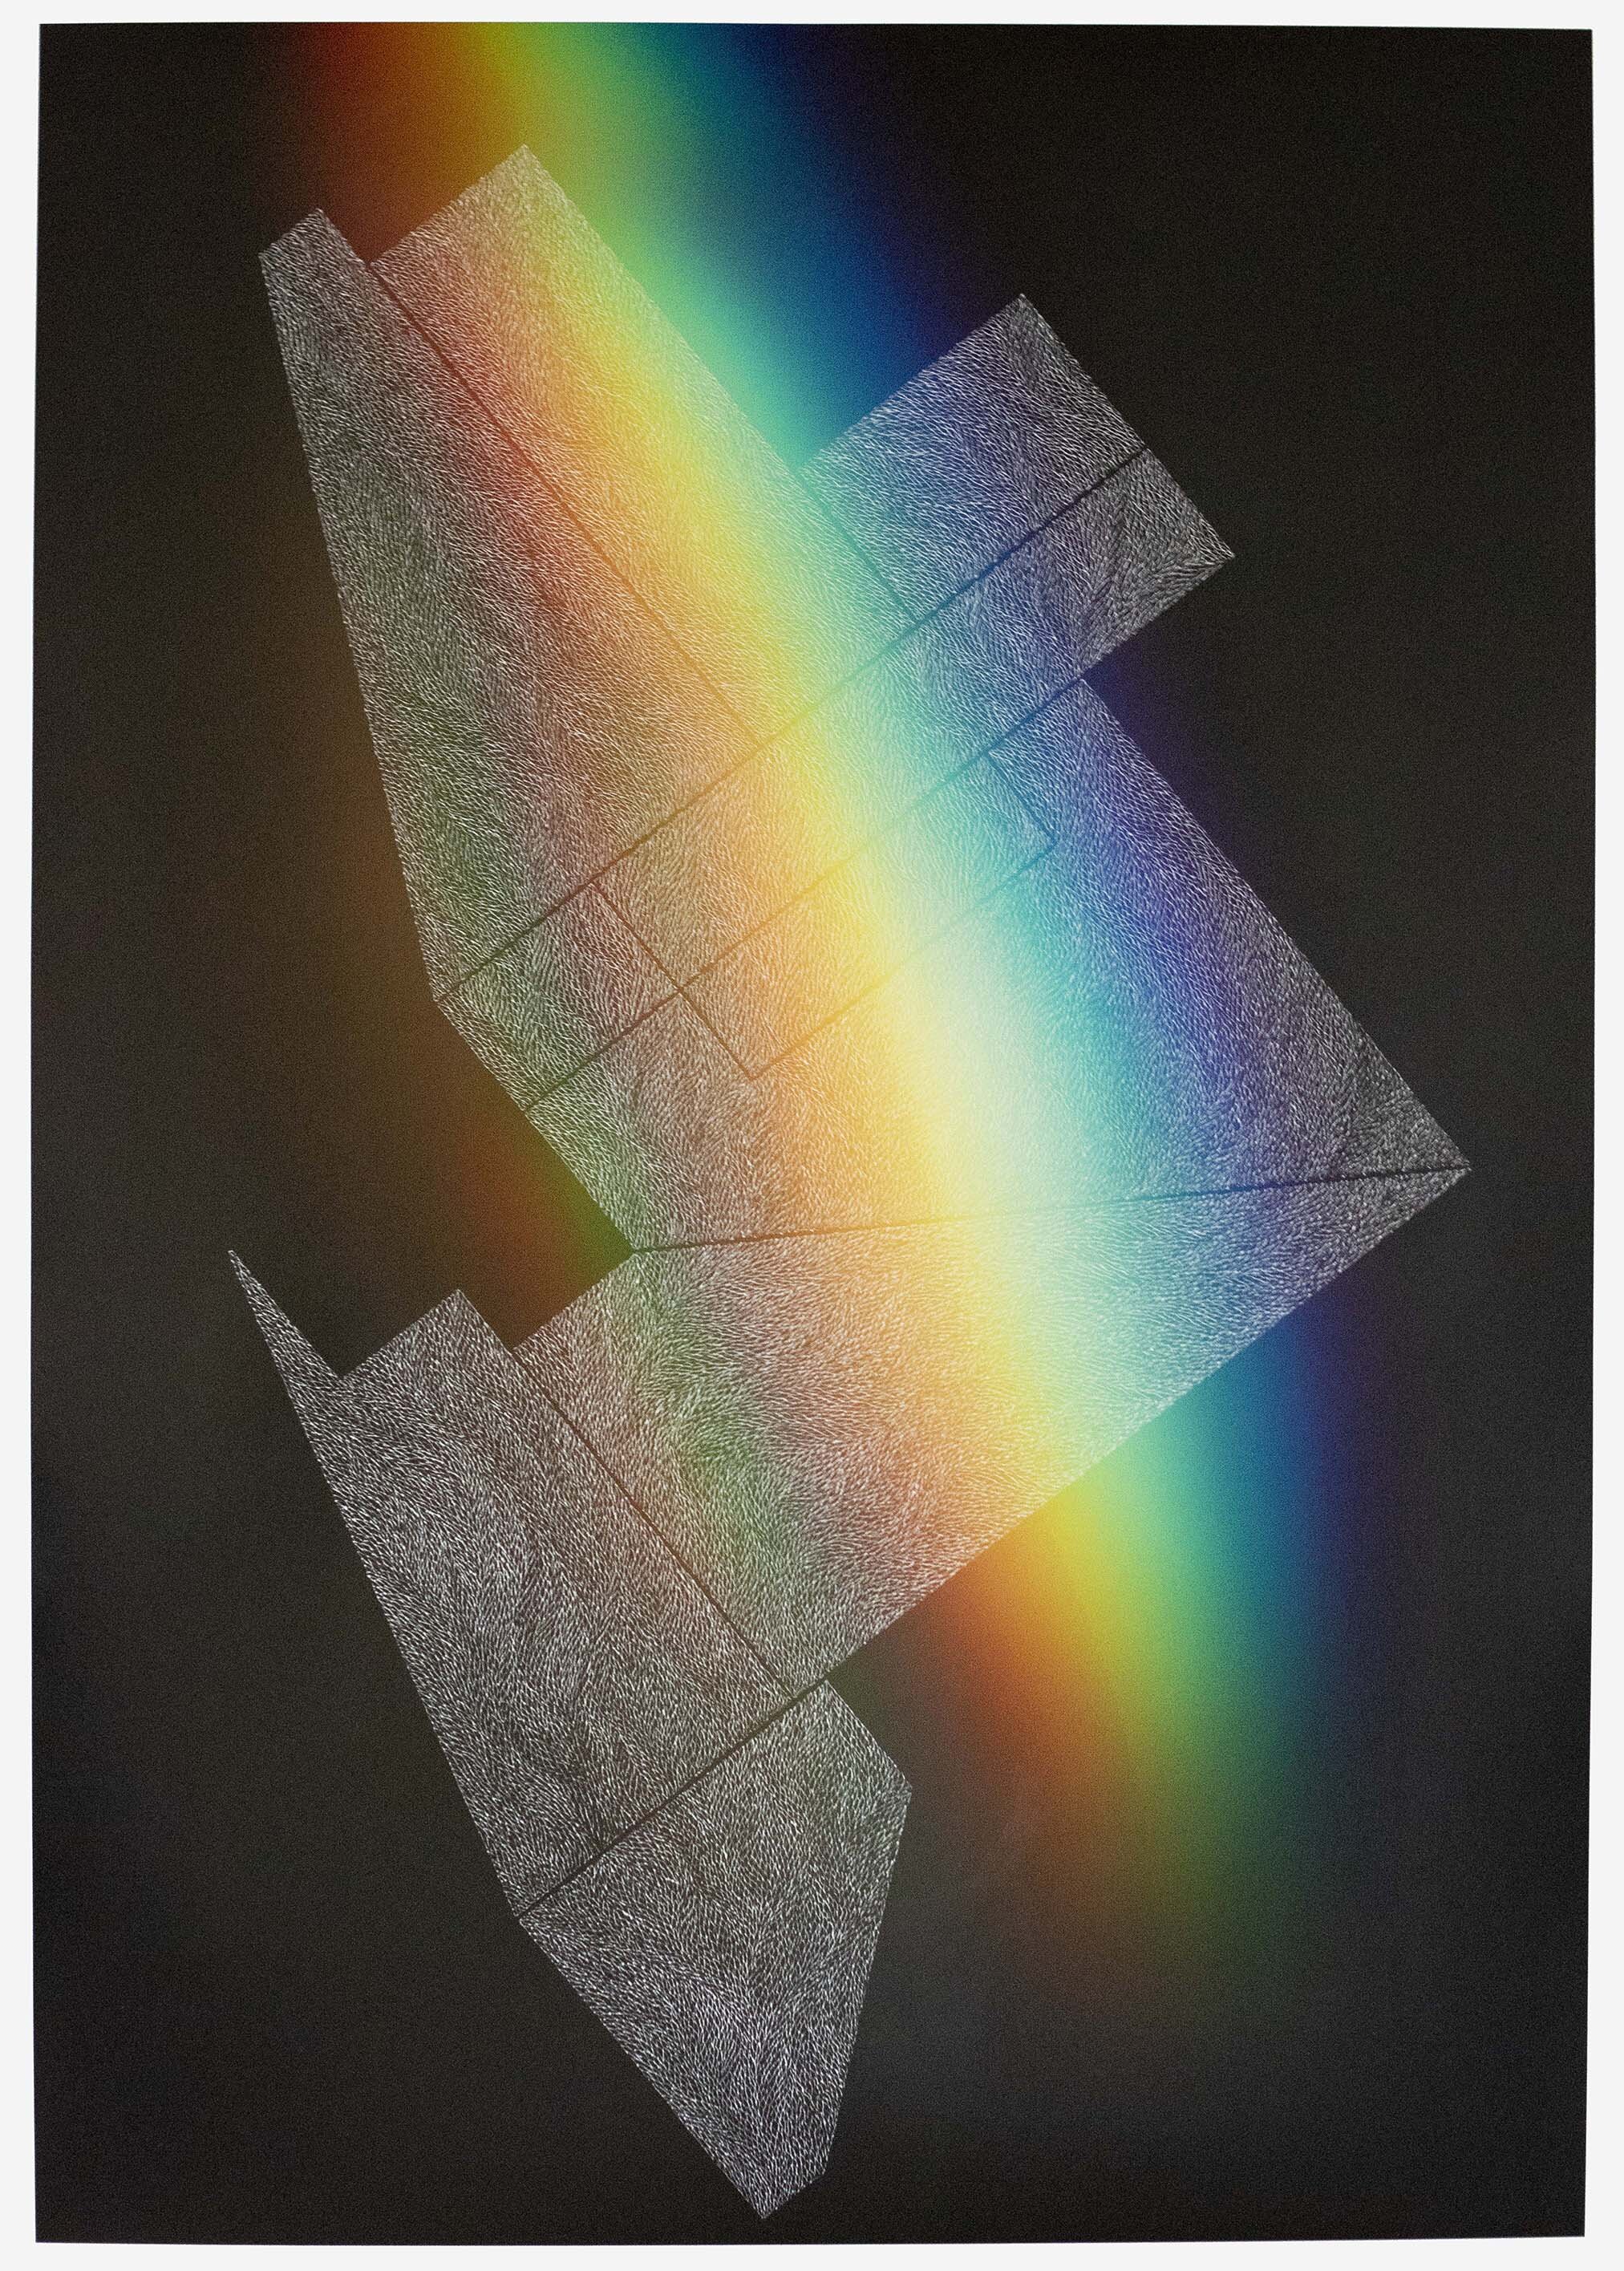  Dark Prism 58x40 Inches 2019 x-acto blade etching on hahnemuhle rag paper 